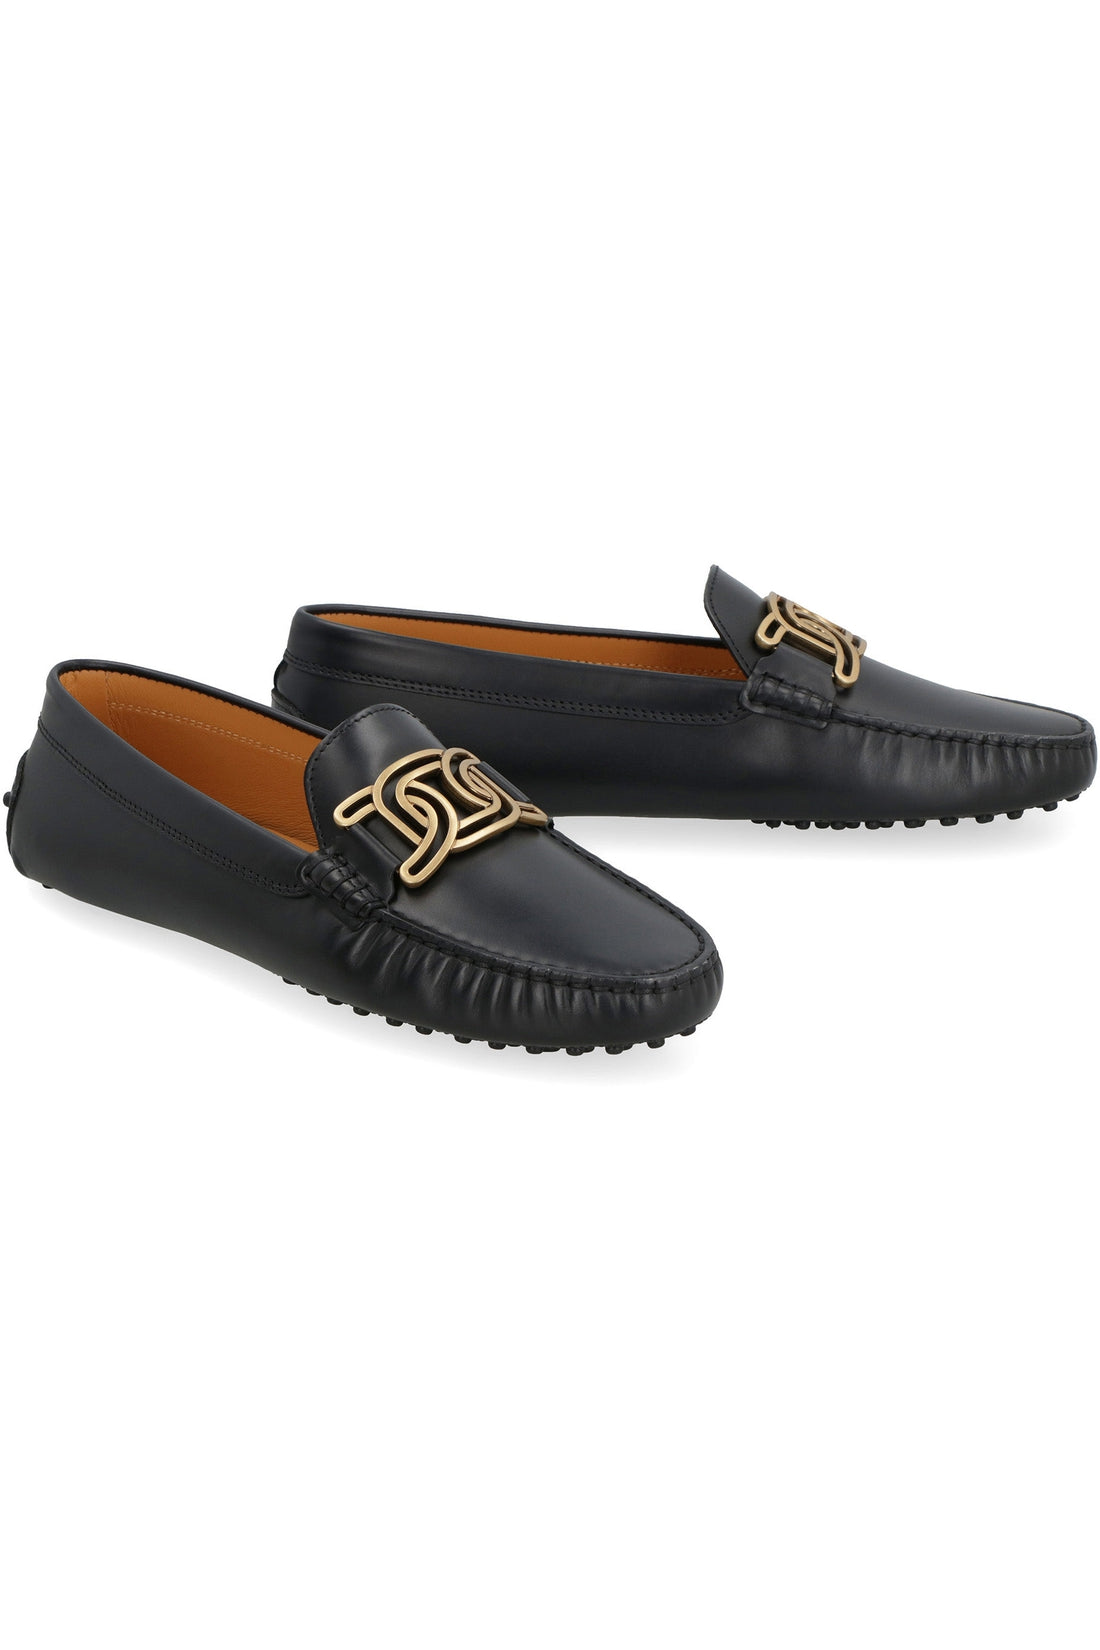 Tod's-OUTLET-SALE-Kate leather loafers-ARCHIVIST